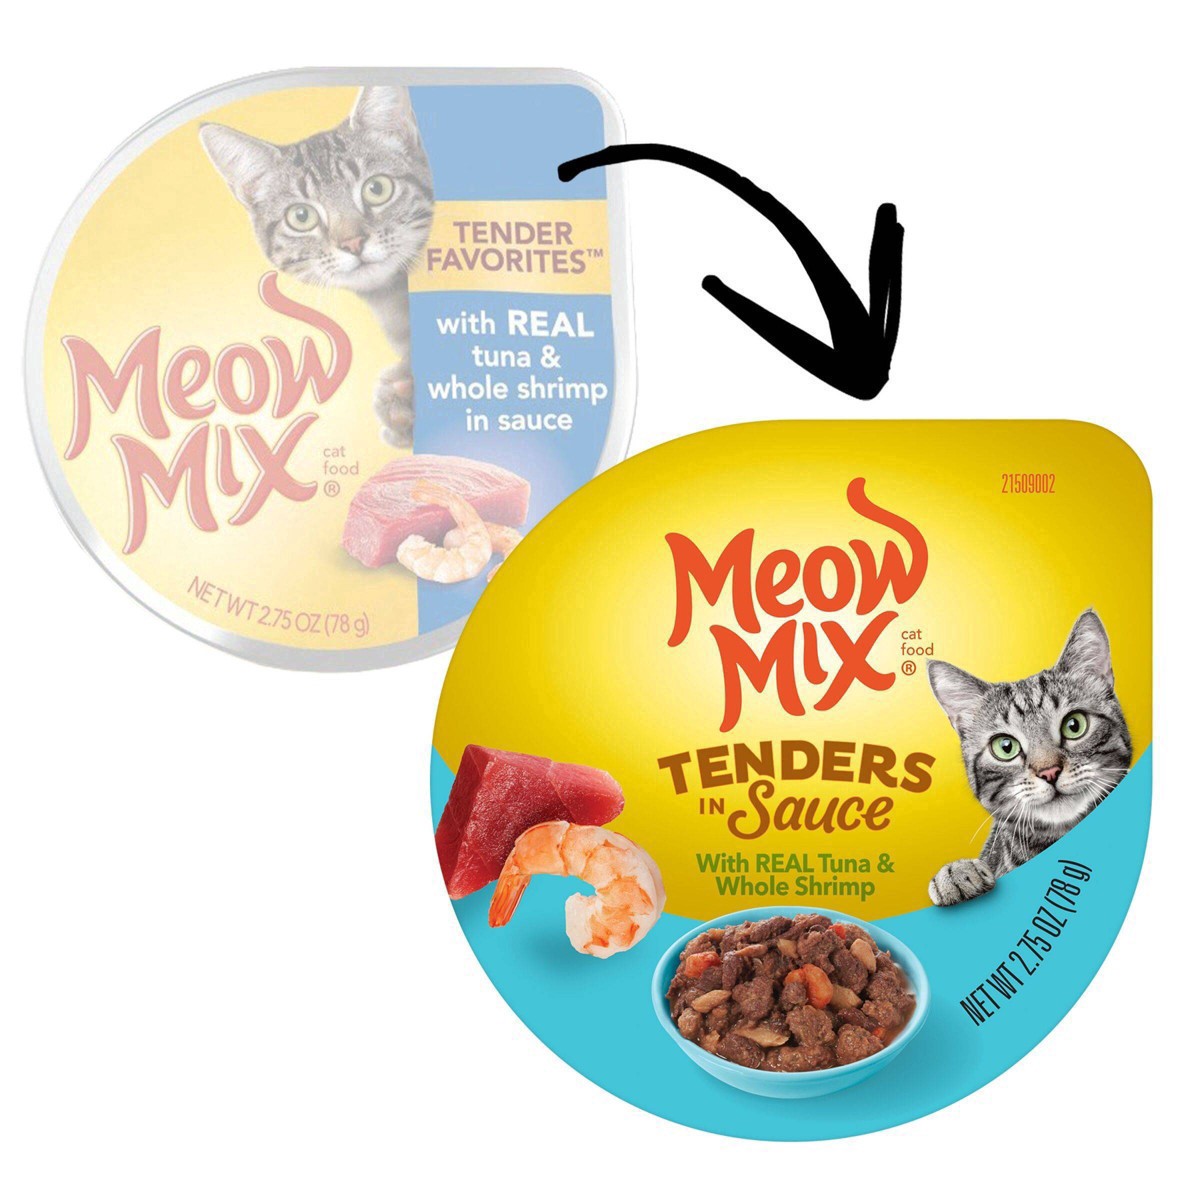 slide 50 of 59, Meow Mix Tenders in Sauce Wet Cat Food With REAL Tuna & Whole Shrimp, 2.75 Oz. Cup (Packaging And Formulation Updates Underway), 2.7 oz